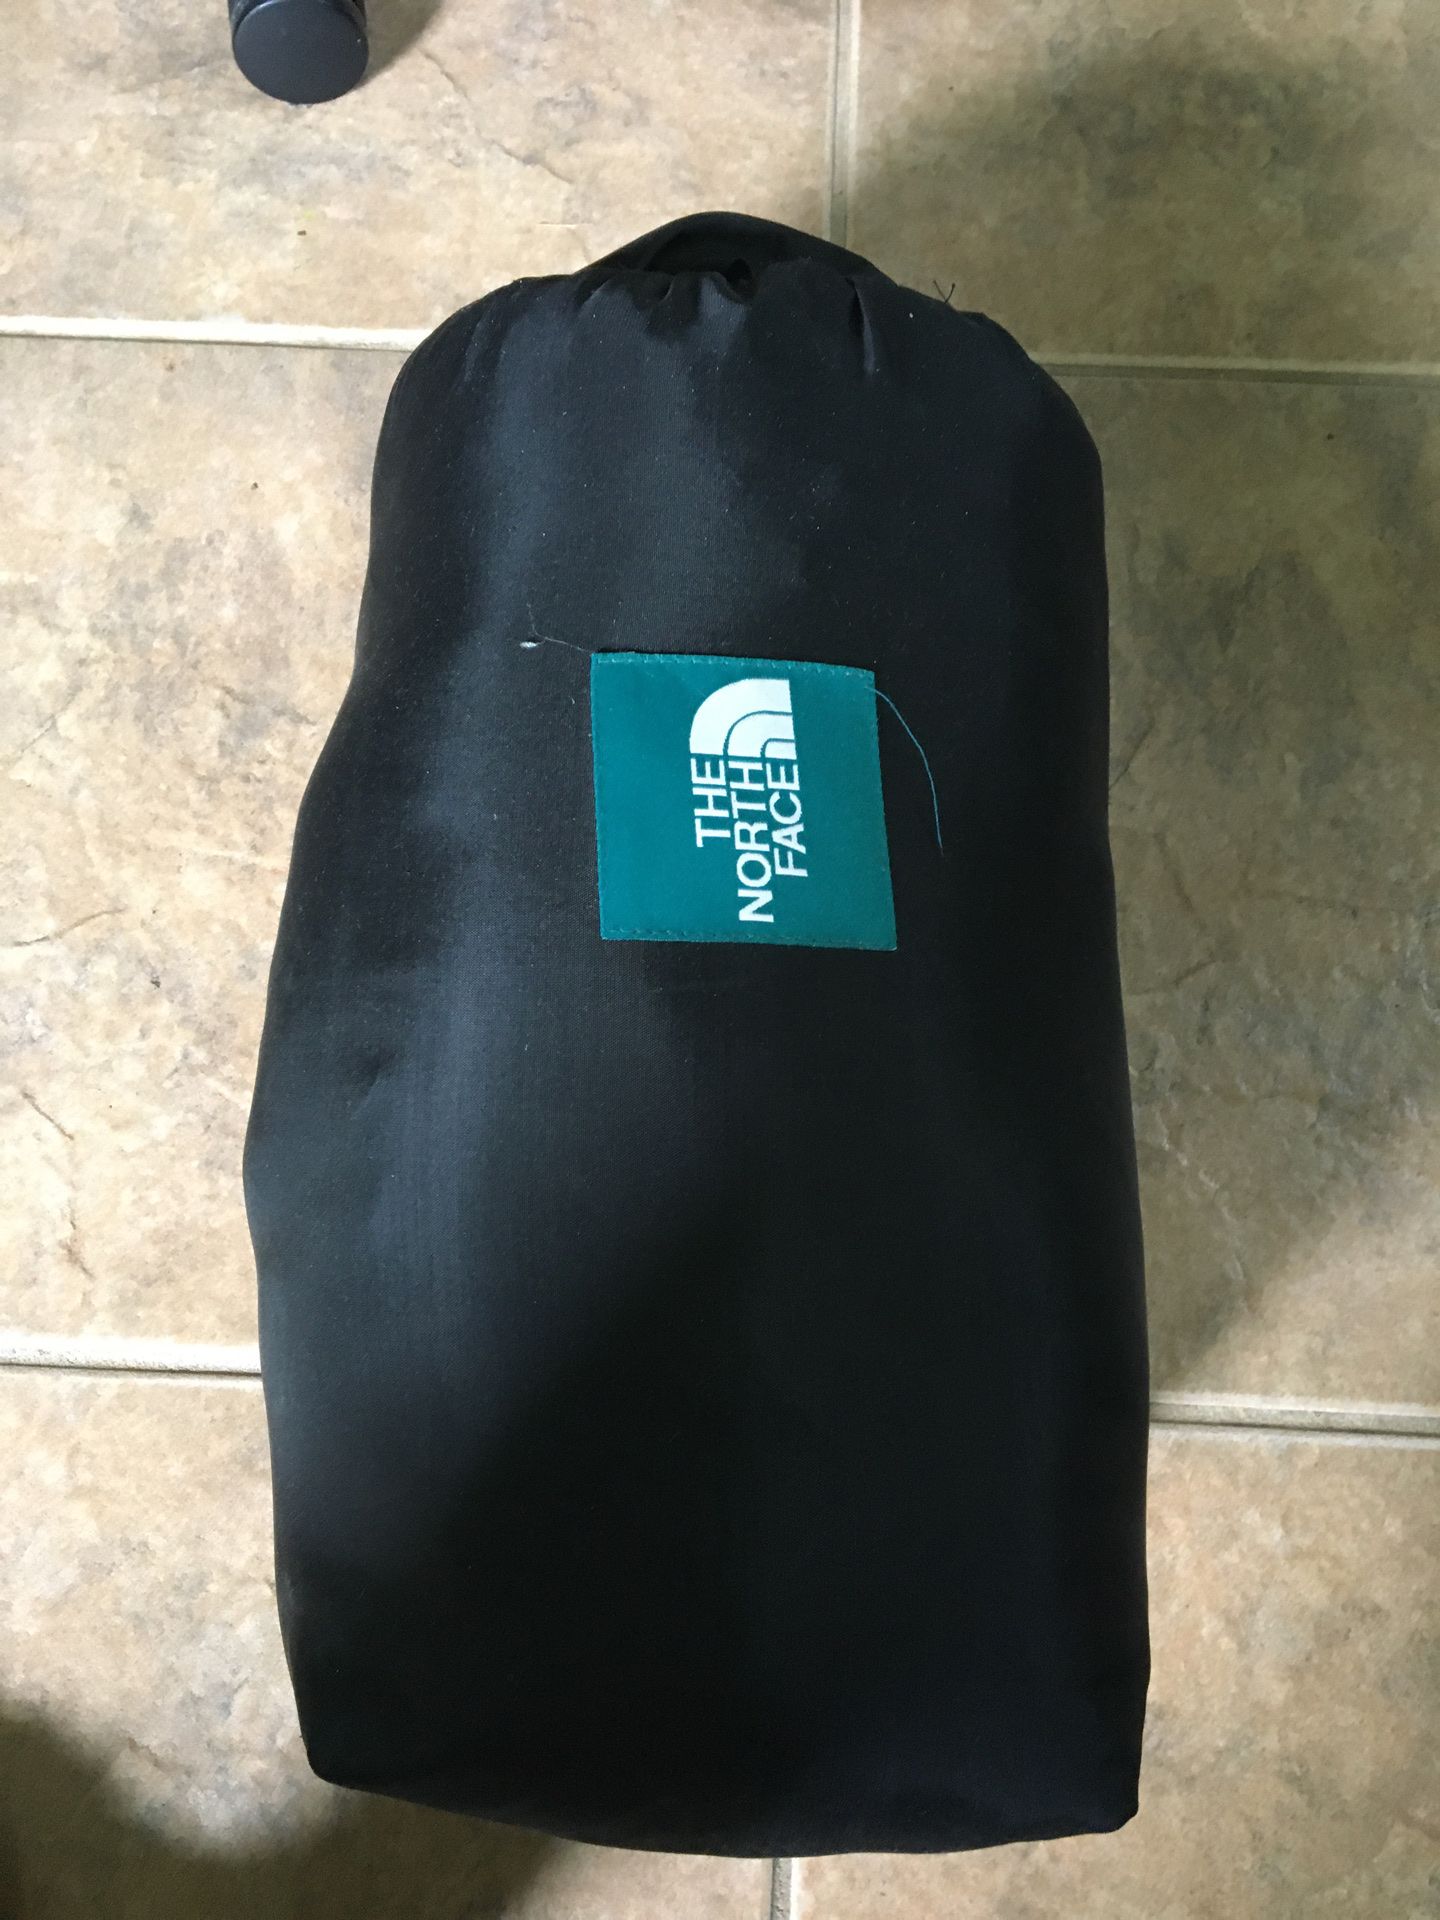 North Face 15 rated mummy sleeping bag.